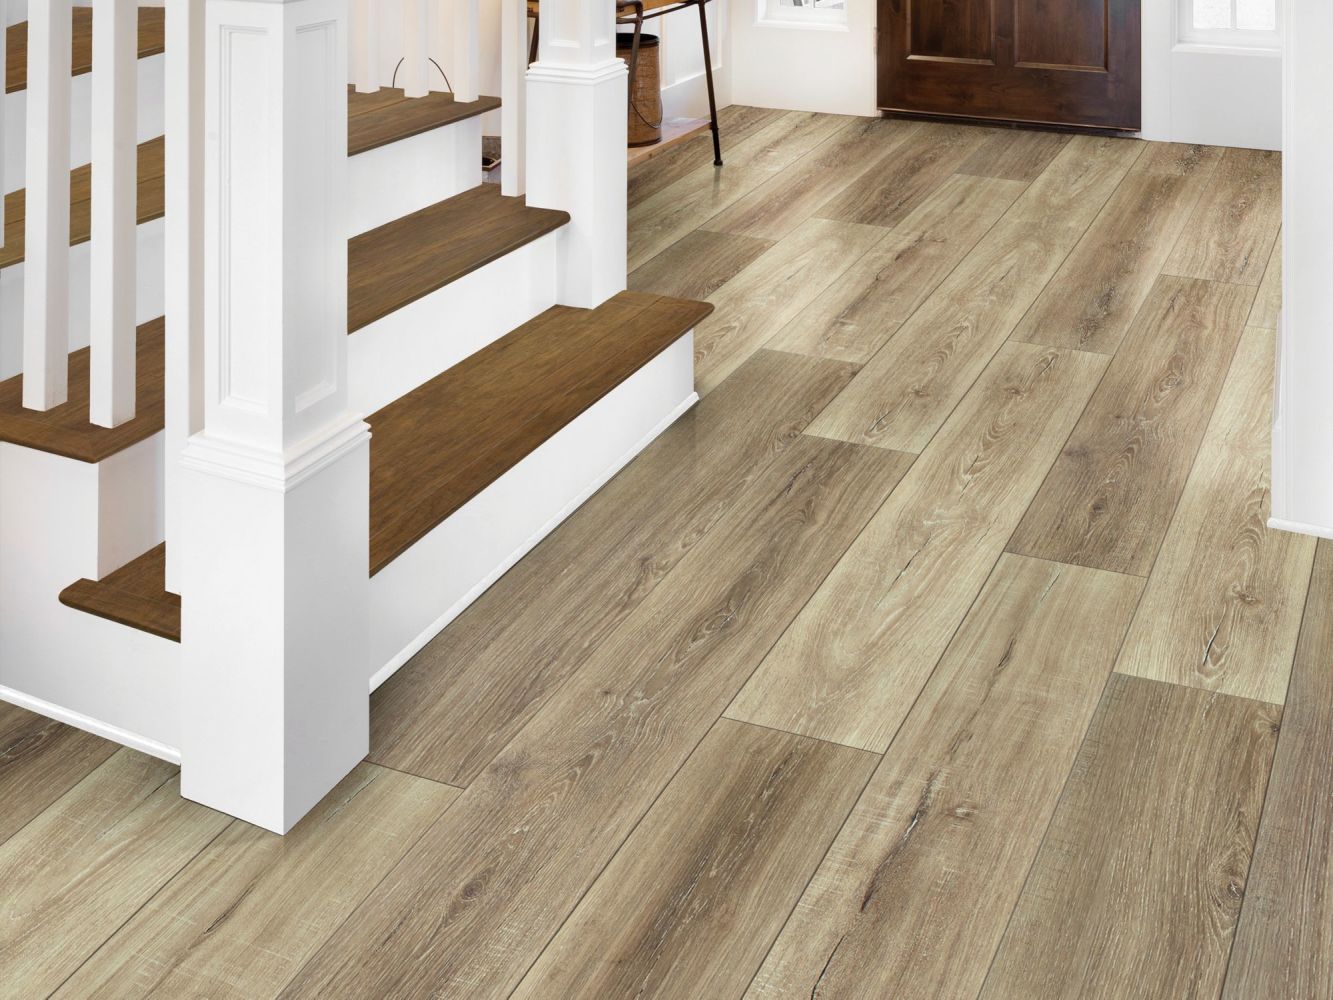 Shaw Floors Resilient Residential Tenacious Hd+ Accent Sable 07083_3011V